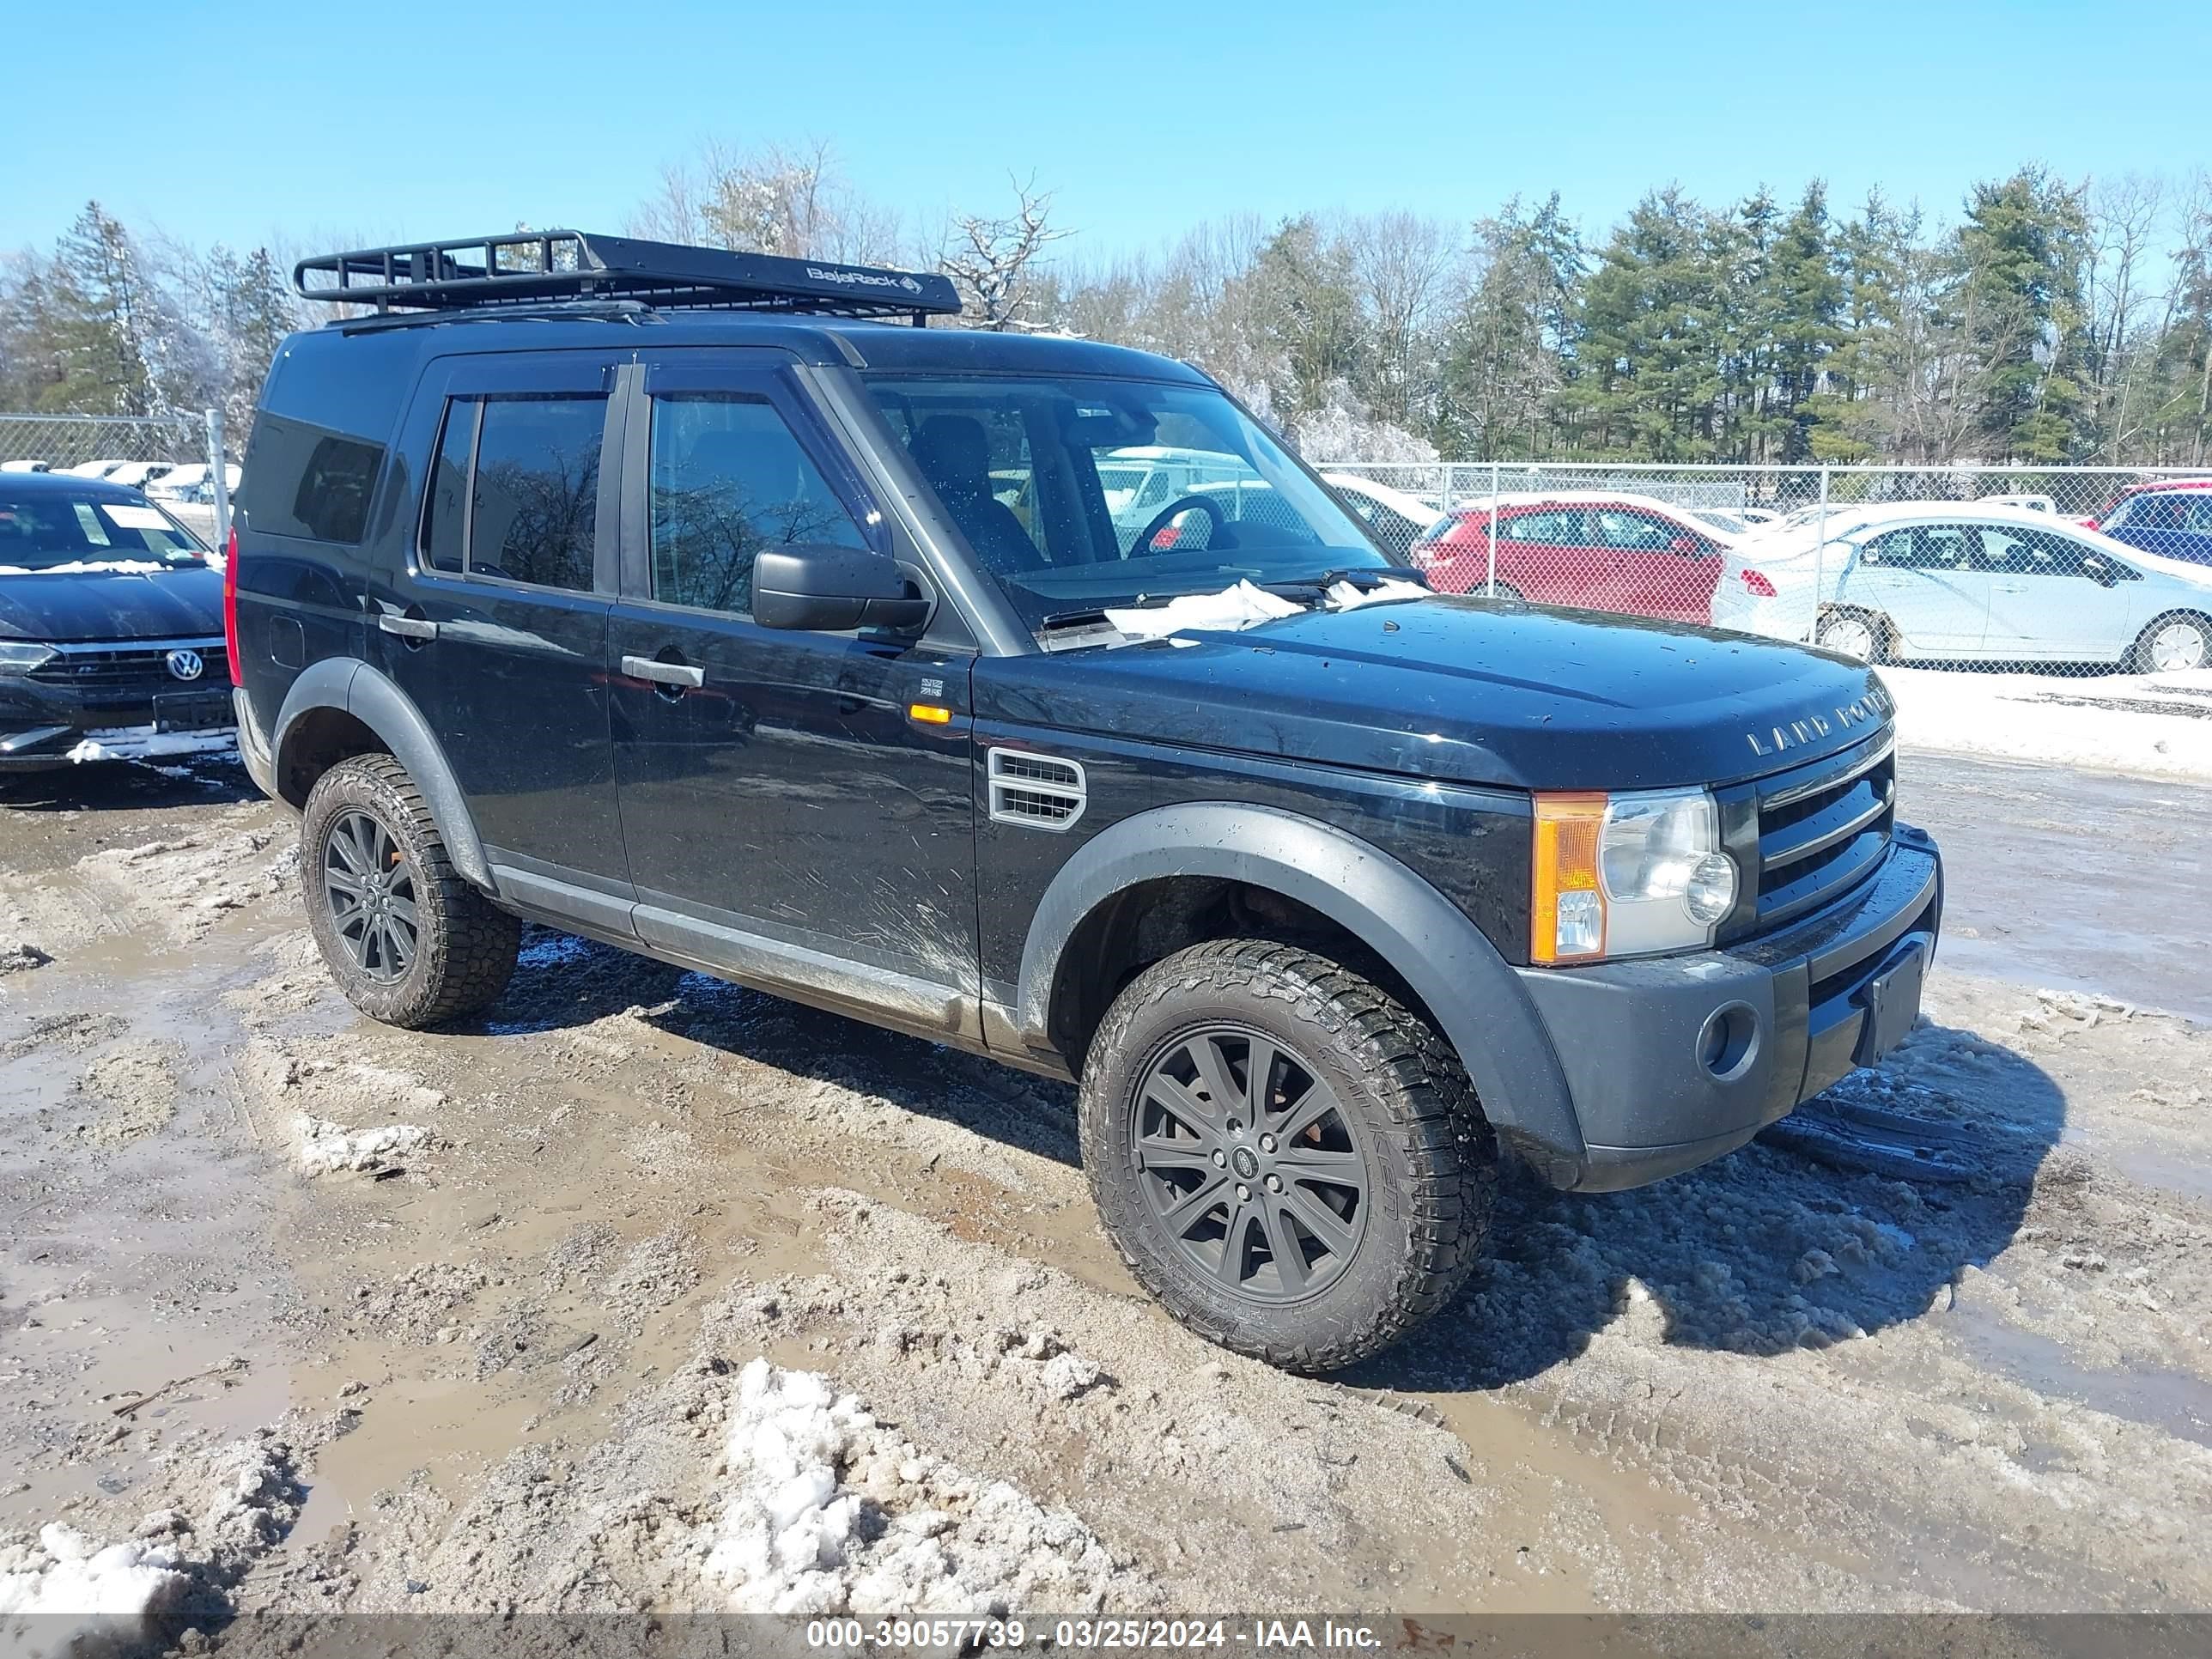 vin: SALAE25458A475476 SALAE25458A475476 2008 land rover lr3 4400 for Sale in 12303, 1210 Kings Road, Schenectady, New York, USA